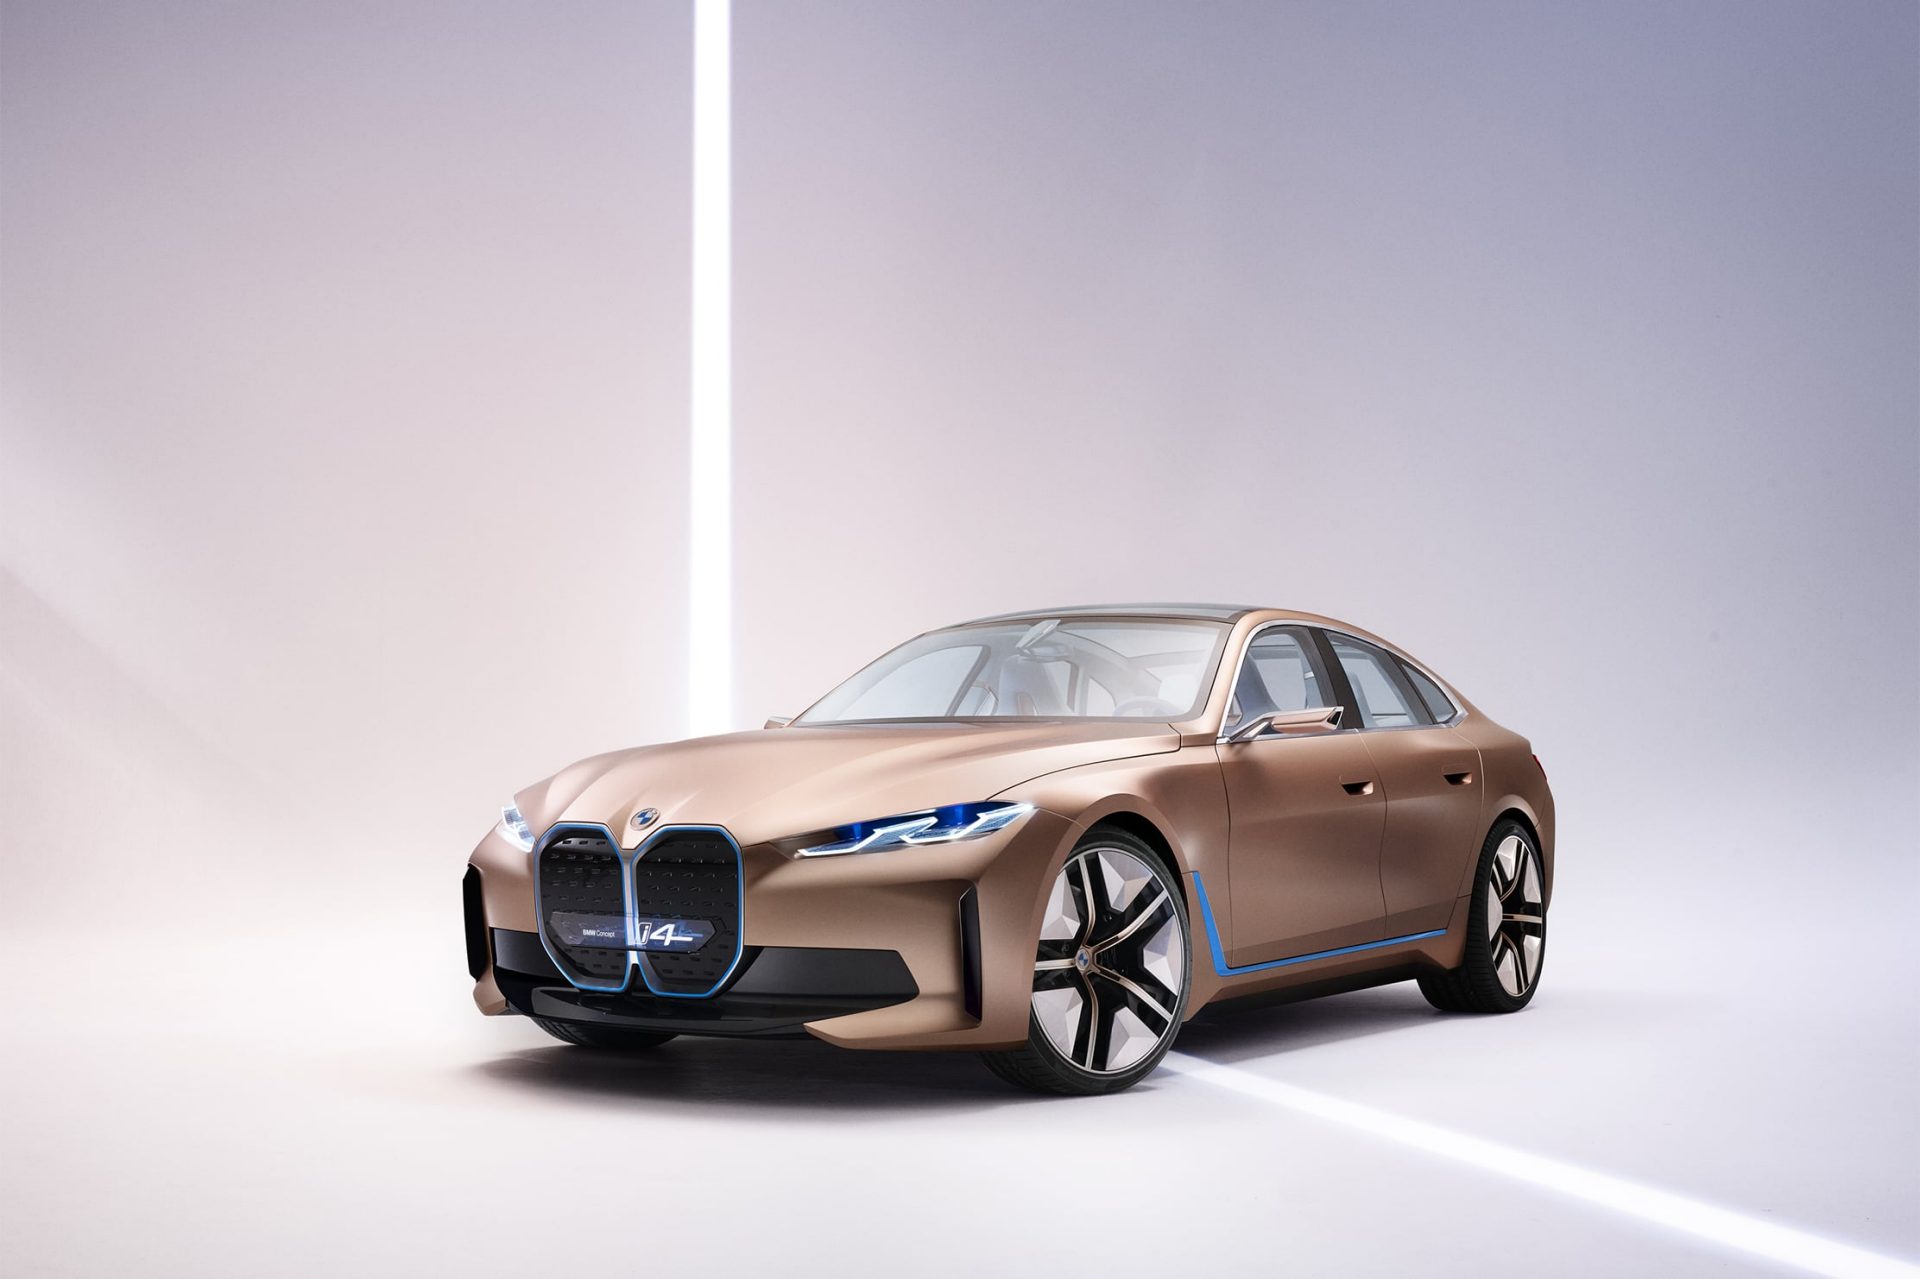 The BMW Concept i4, 3/4 front view